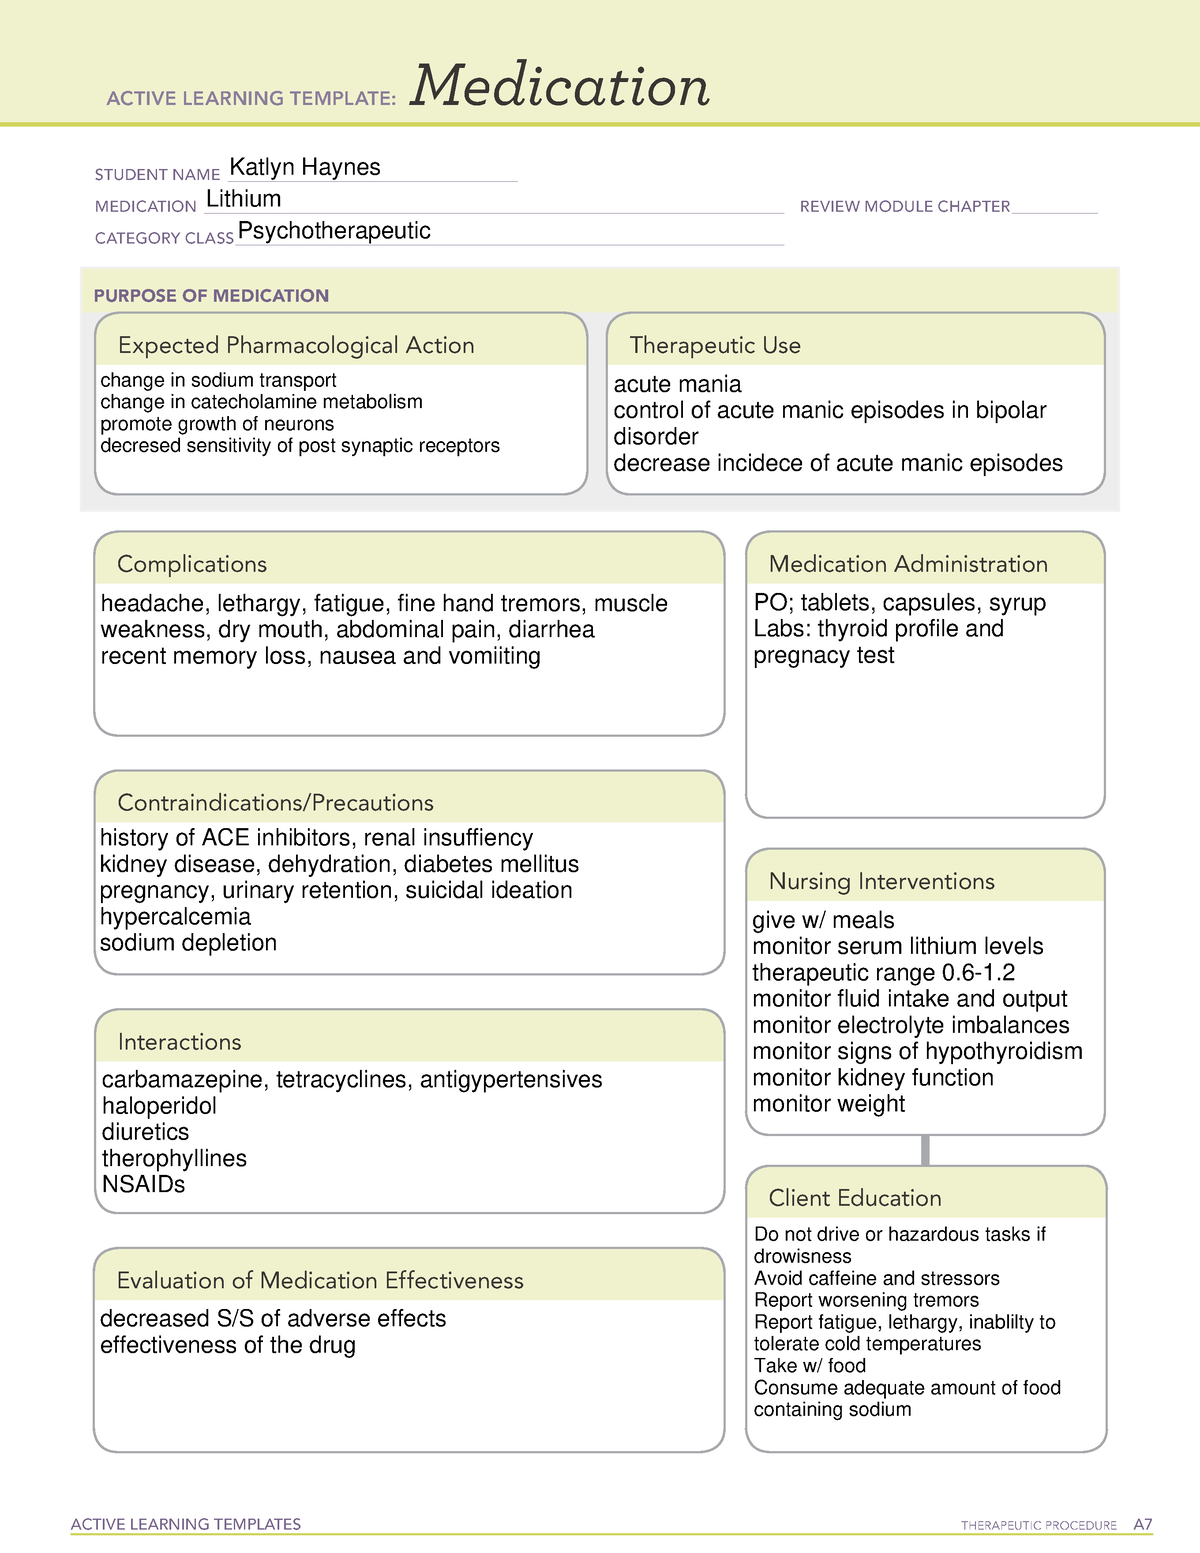 Lithium medication template ACTIVE LEARNING TEMPLATES THERAPEUTIC